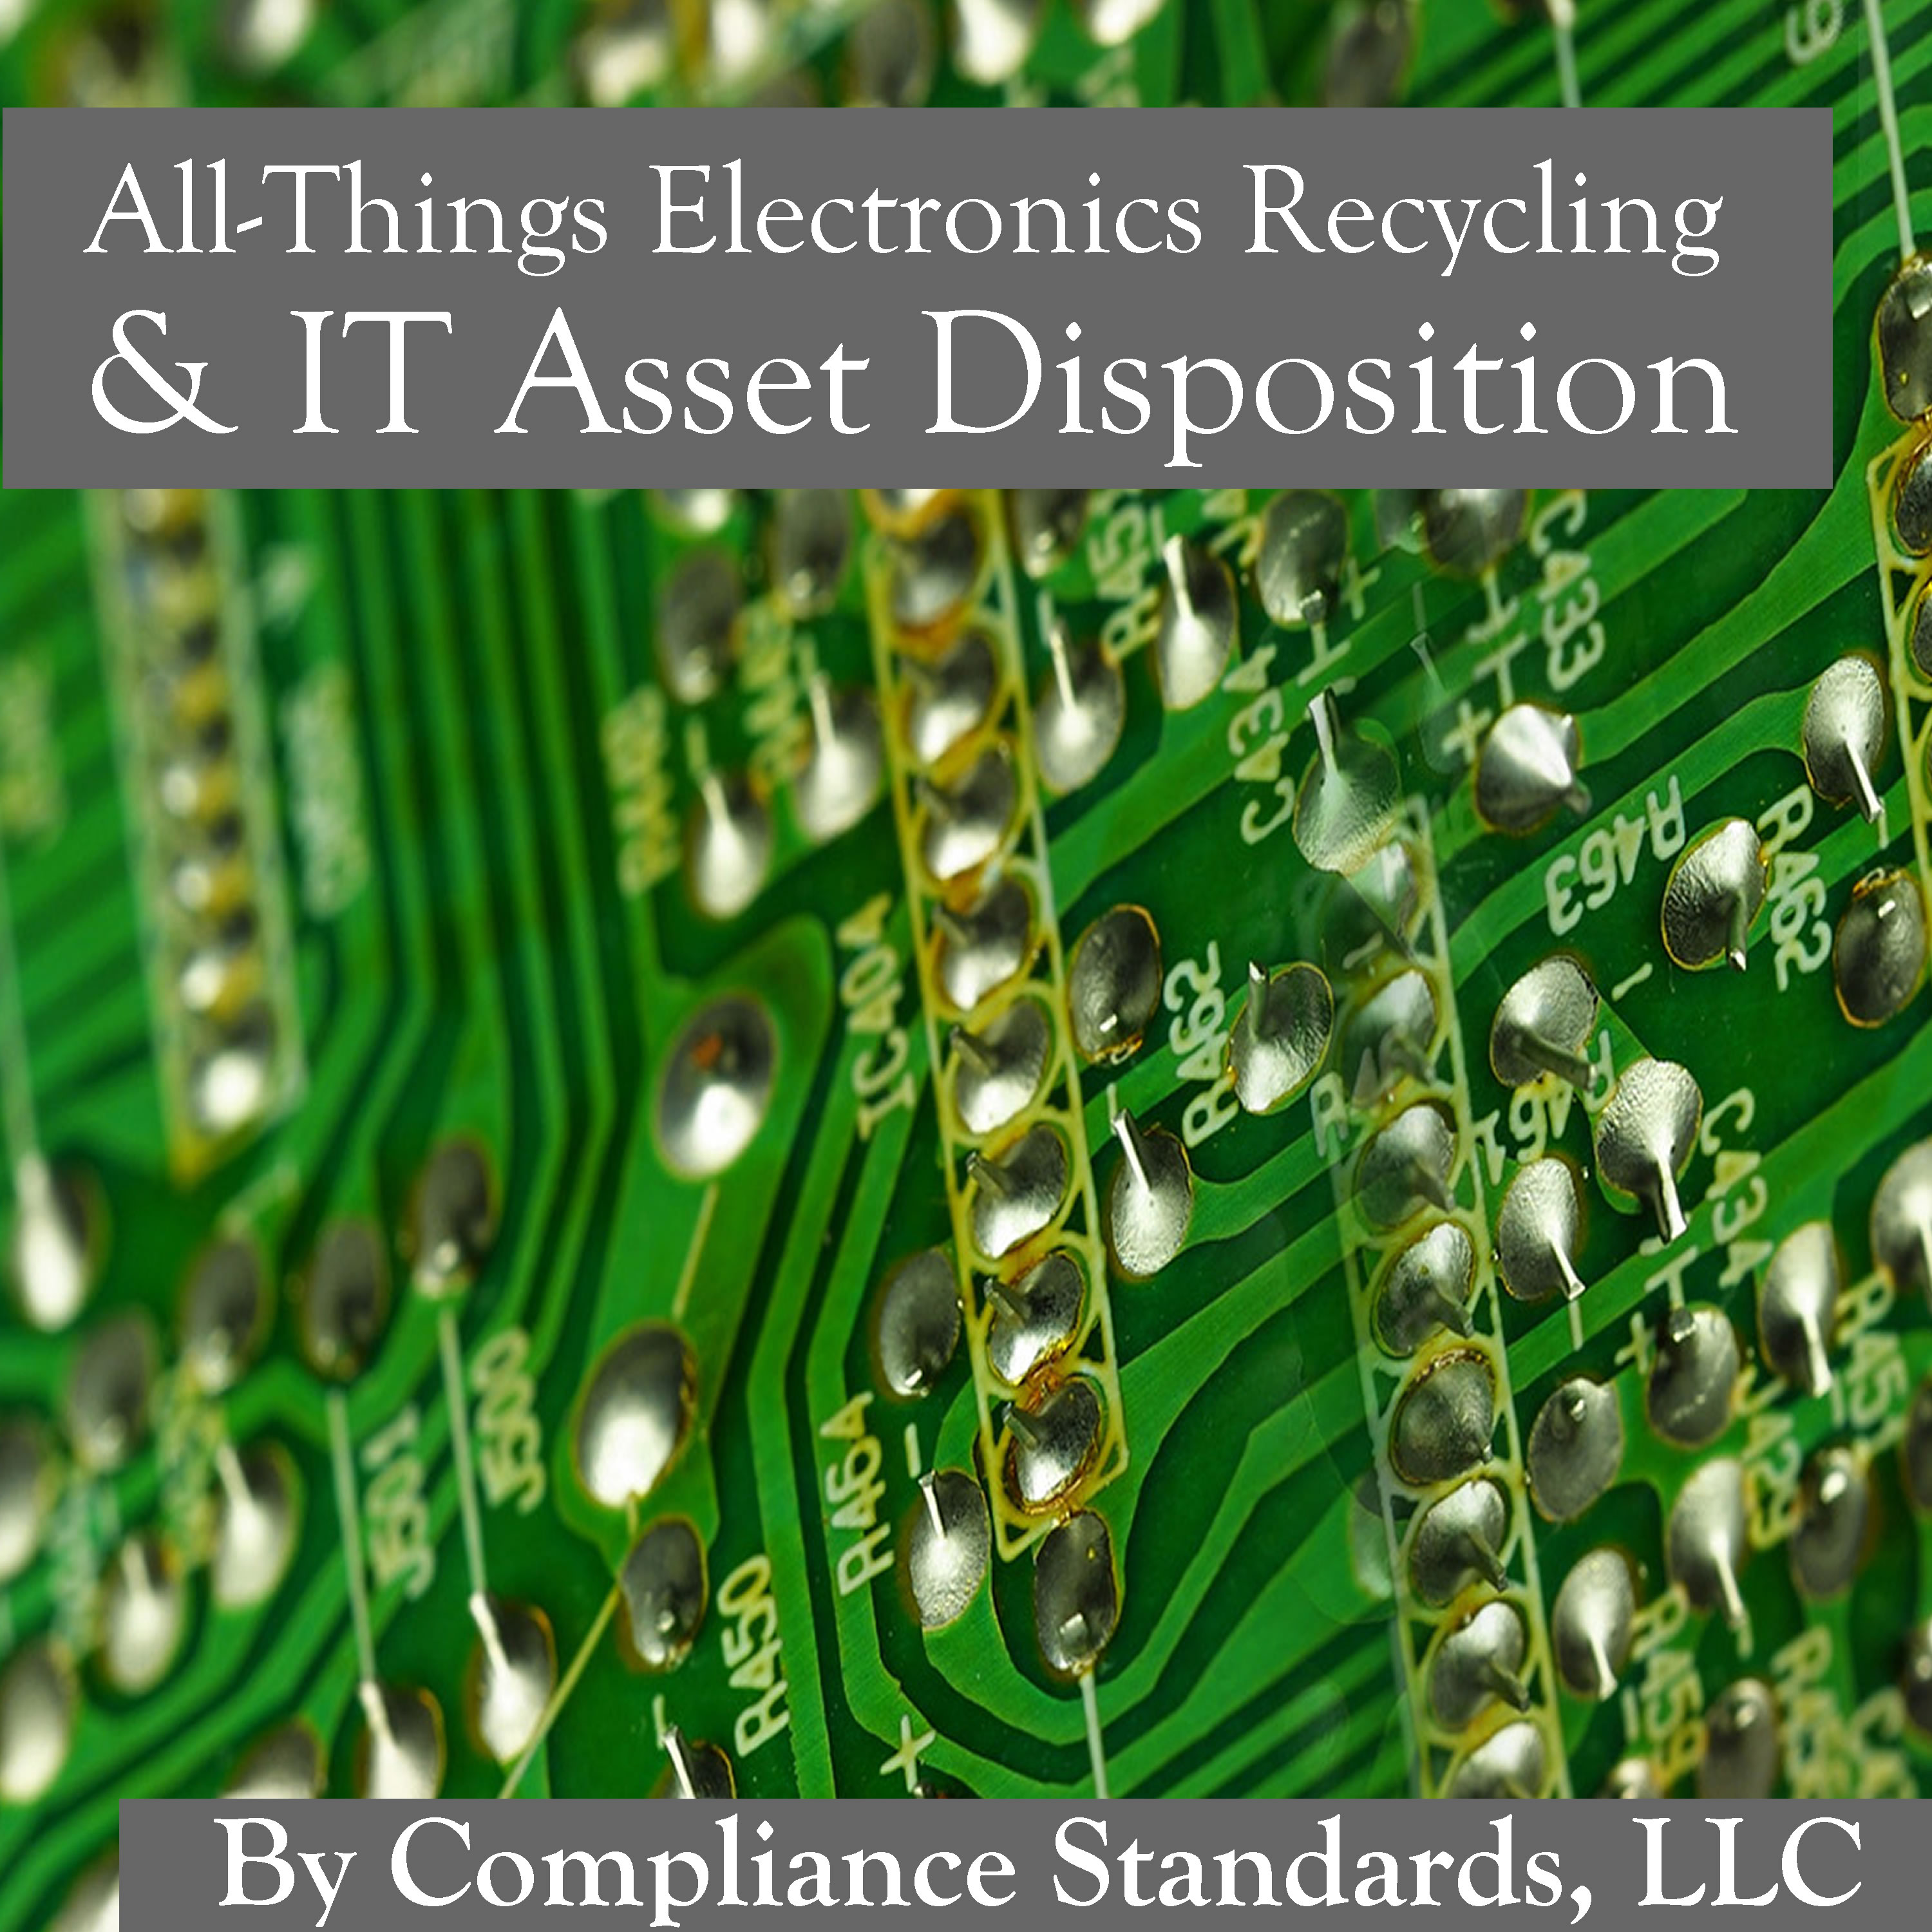 All-Things Electronics Recycling & IT Asset Disposition podcast series by Compliance Standards